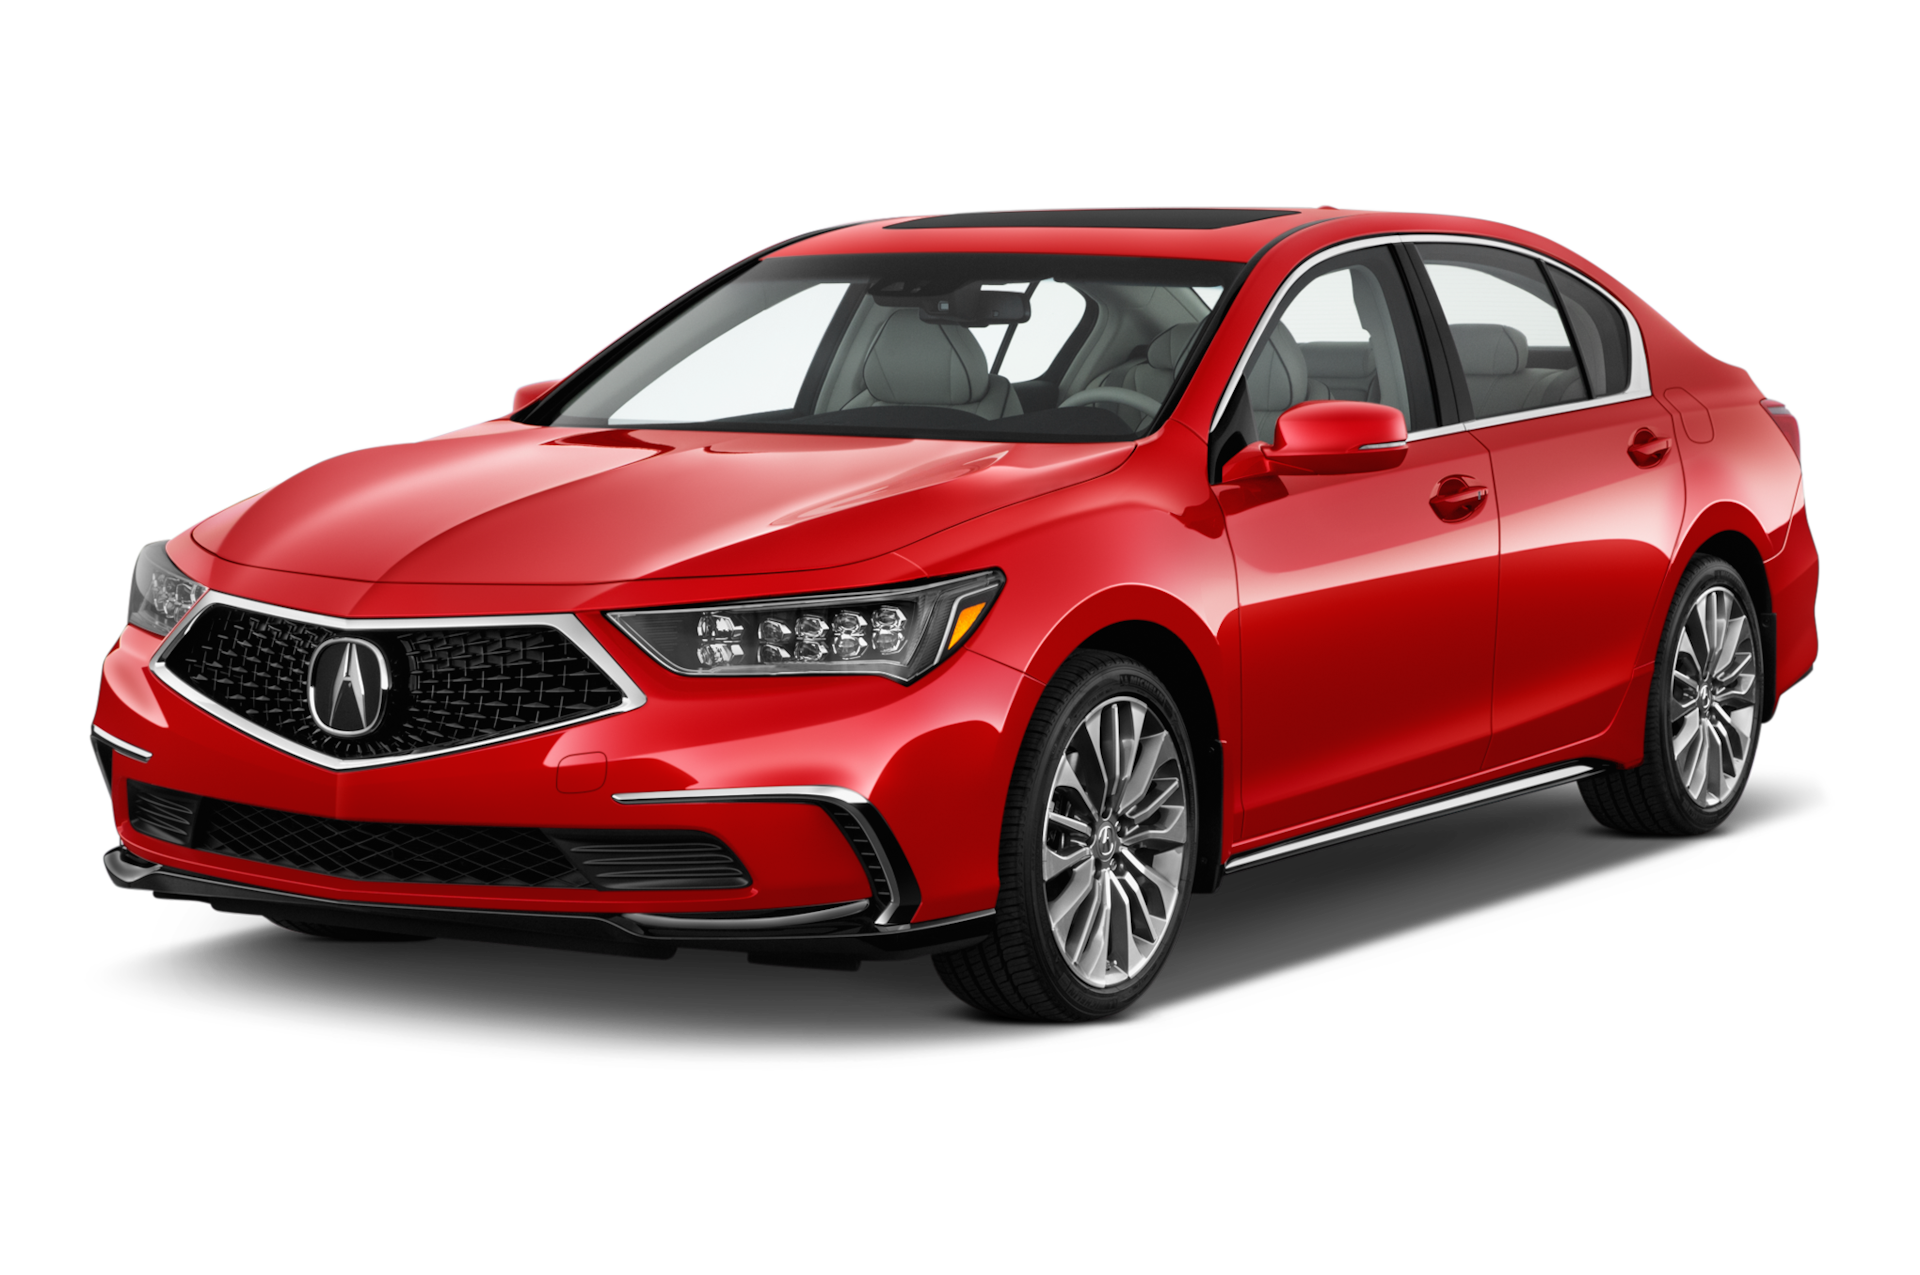 2018 Acura RLX Prices, Reviews, and Photos - MotorTrend